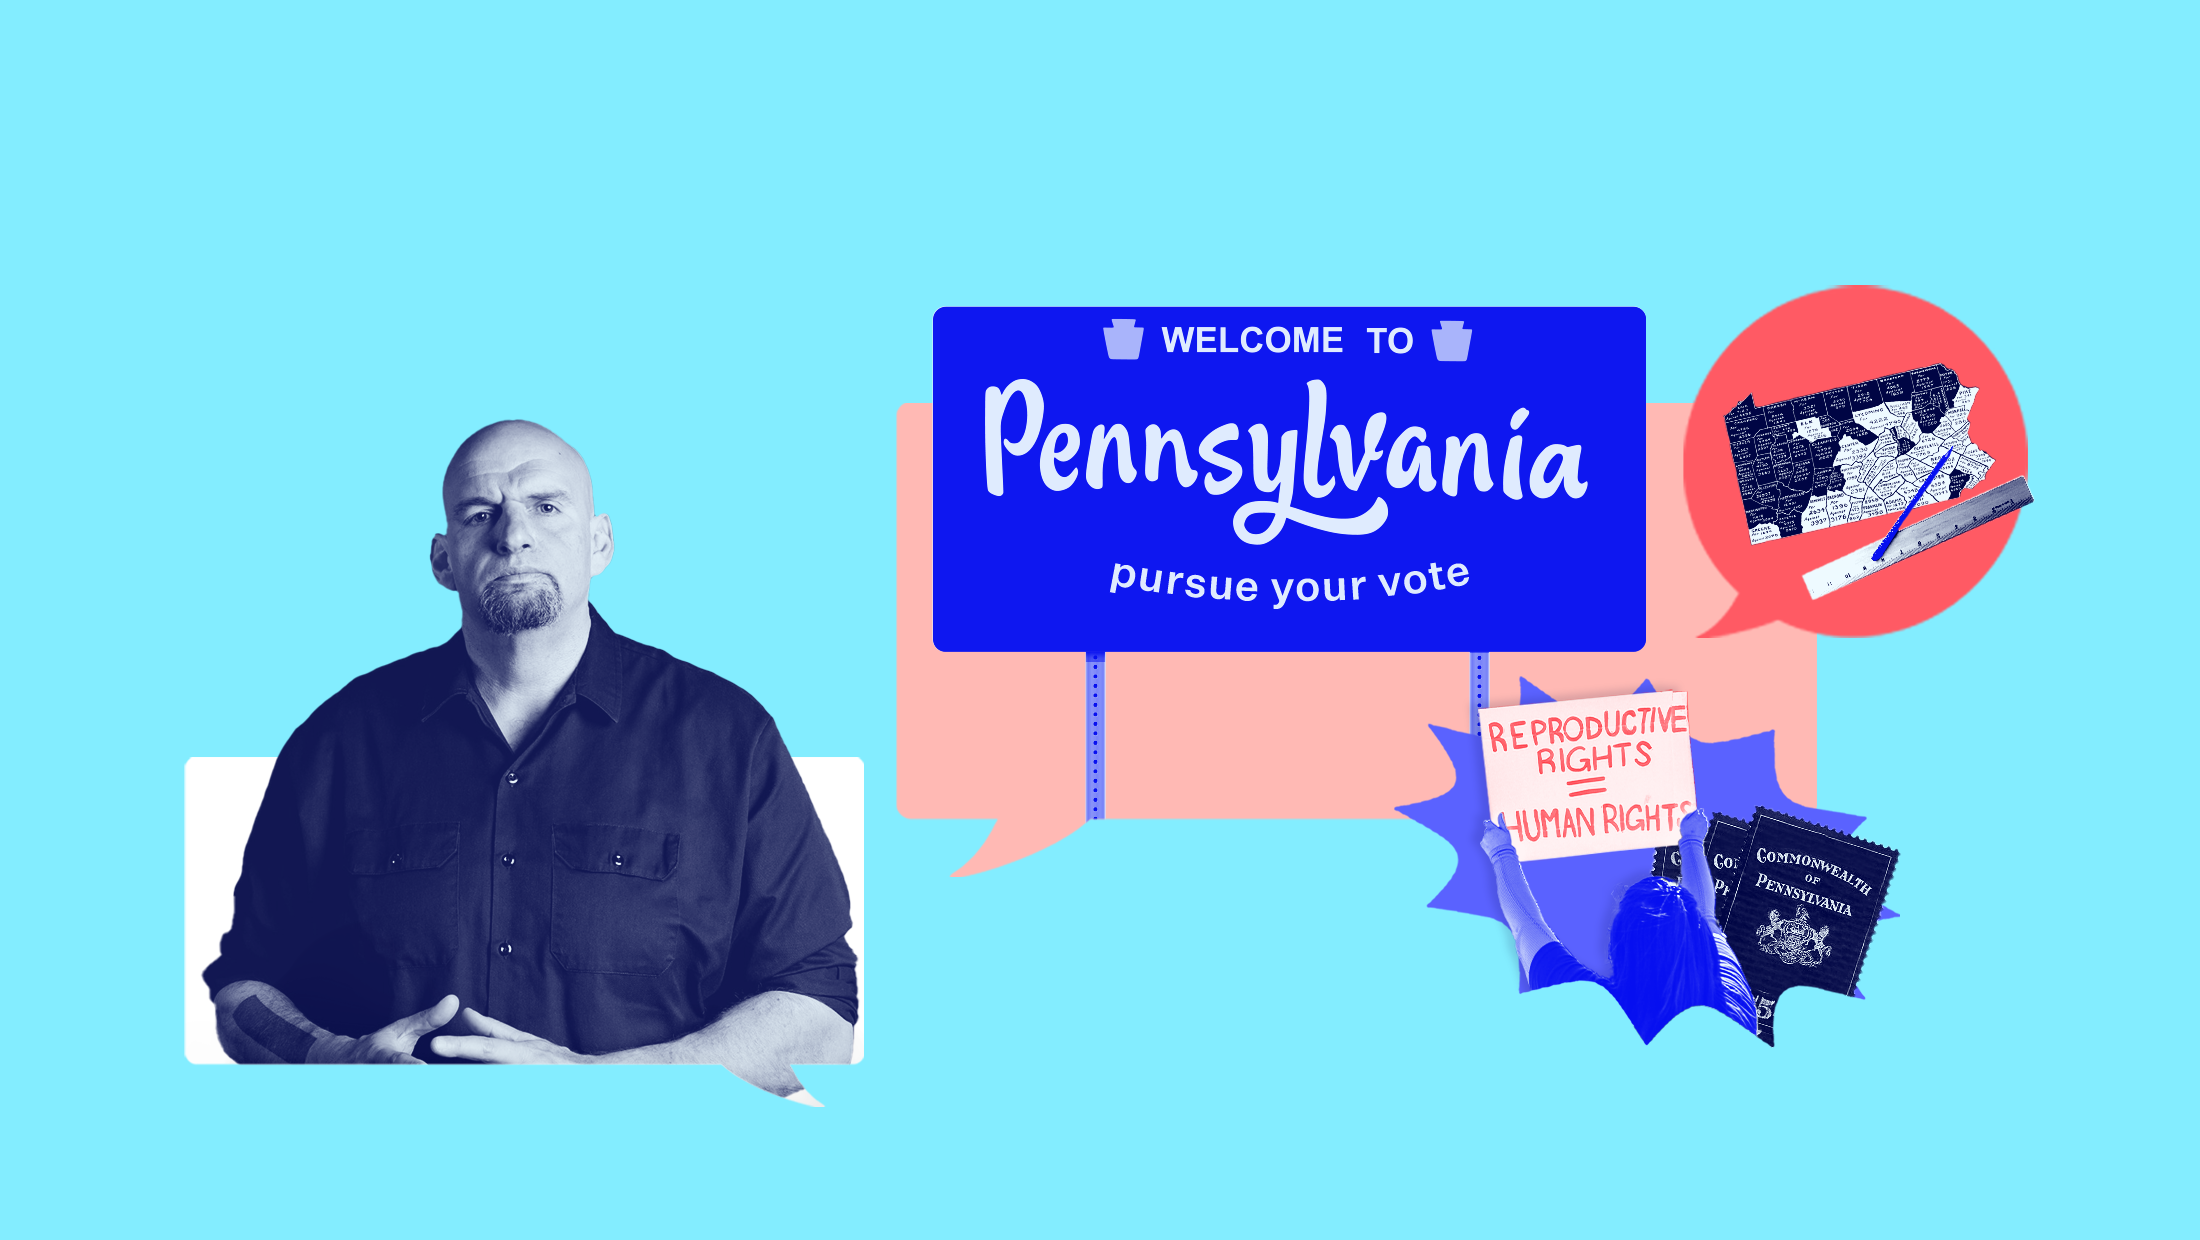 Light blue background with dark blue-toned image of John Fetterman, a blue sign that reads "Welcomes to Pennsylvania, pursue your vote" in front of a pink text bubble, a map of Pennsylvania with a ruler in front of a red text bubble, a person holding a sign that reads "REPRODUCTIVE RIGHTS = HUMAN WRITES" and a stack of pamphlets that say "Commonwealth of Pennsylvania"